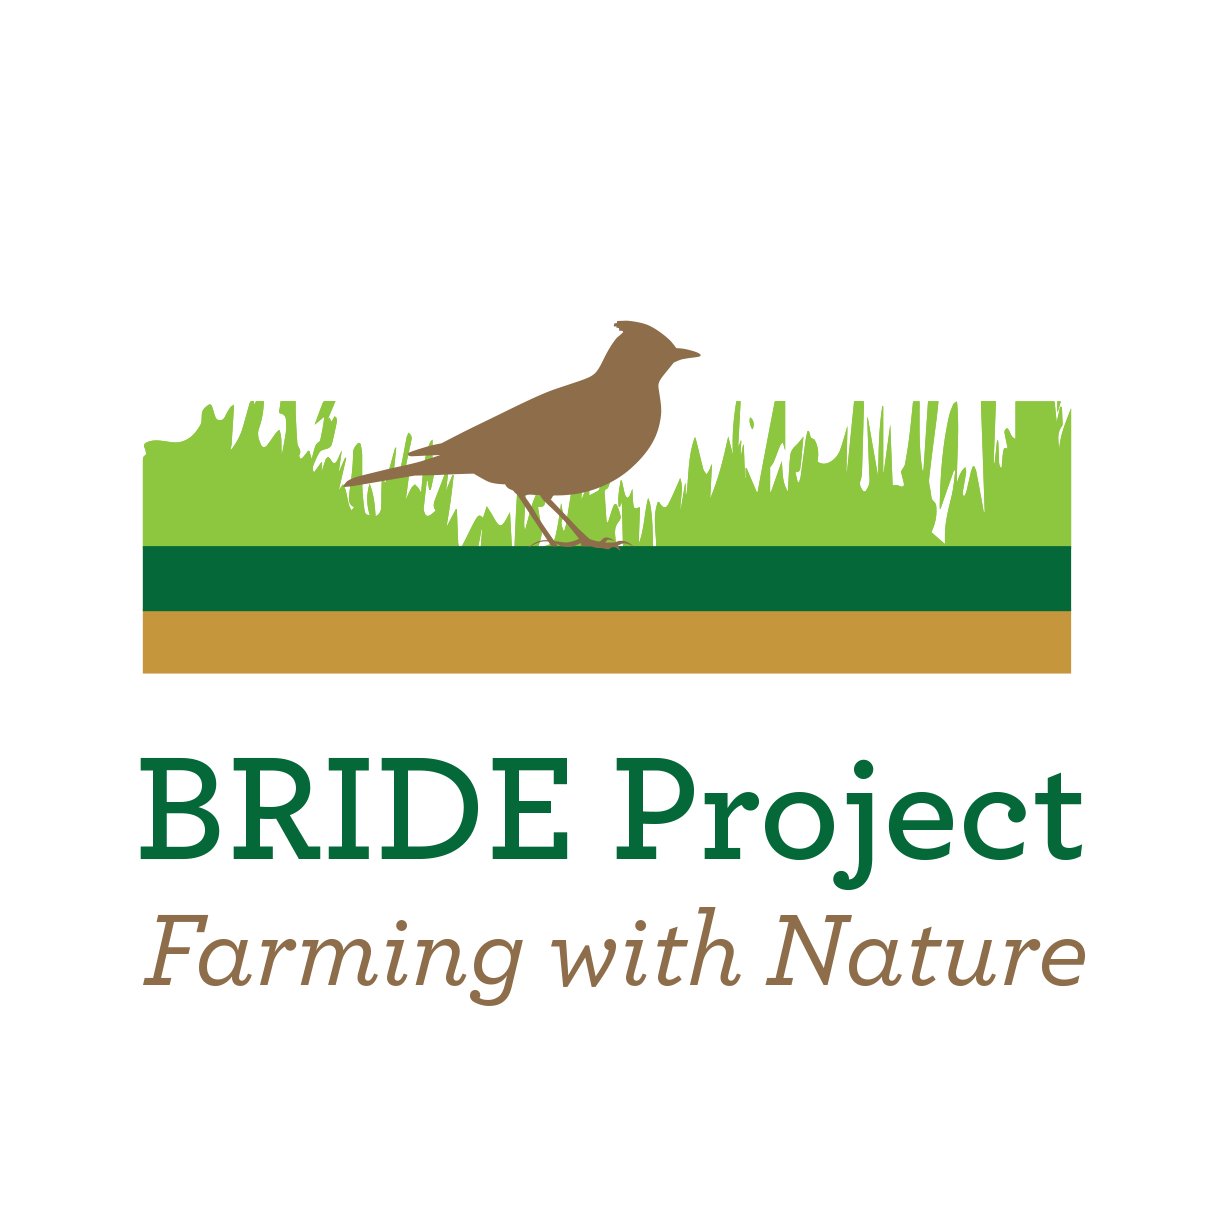 The ‘Biodiversity Regeneration In a Dairying Environment’ (BRIDE) project will provide farmers with effective wildlife management options for individual farms.